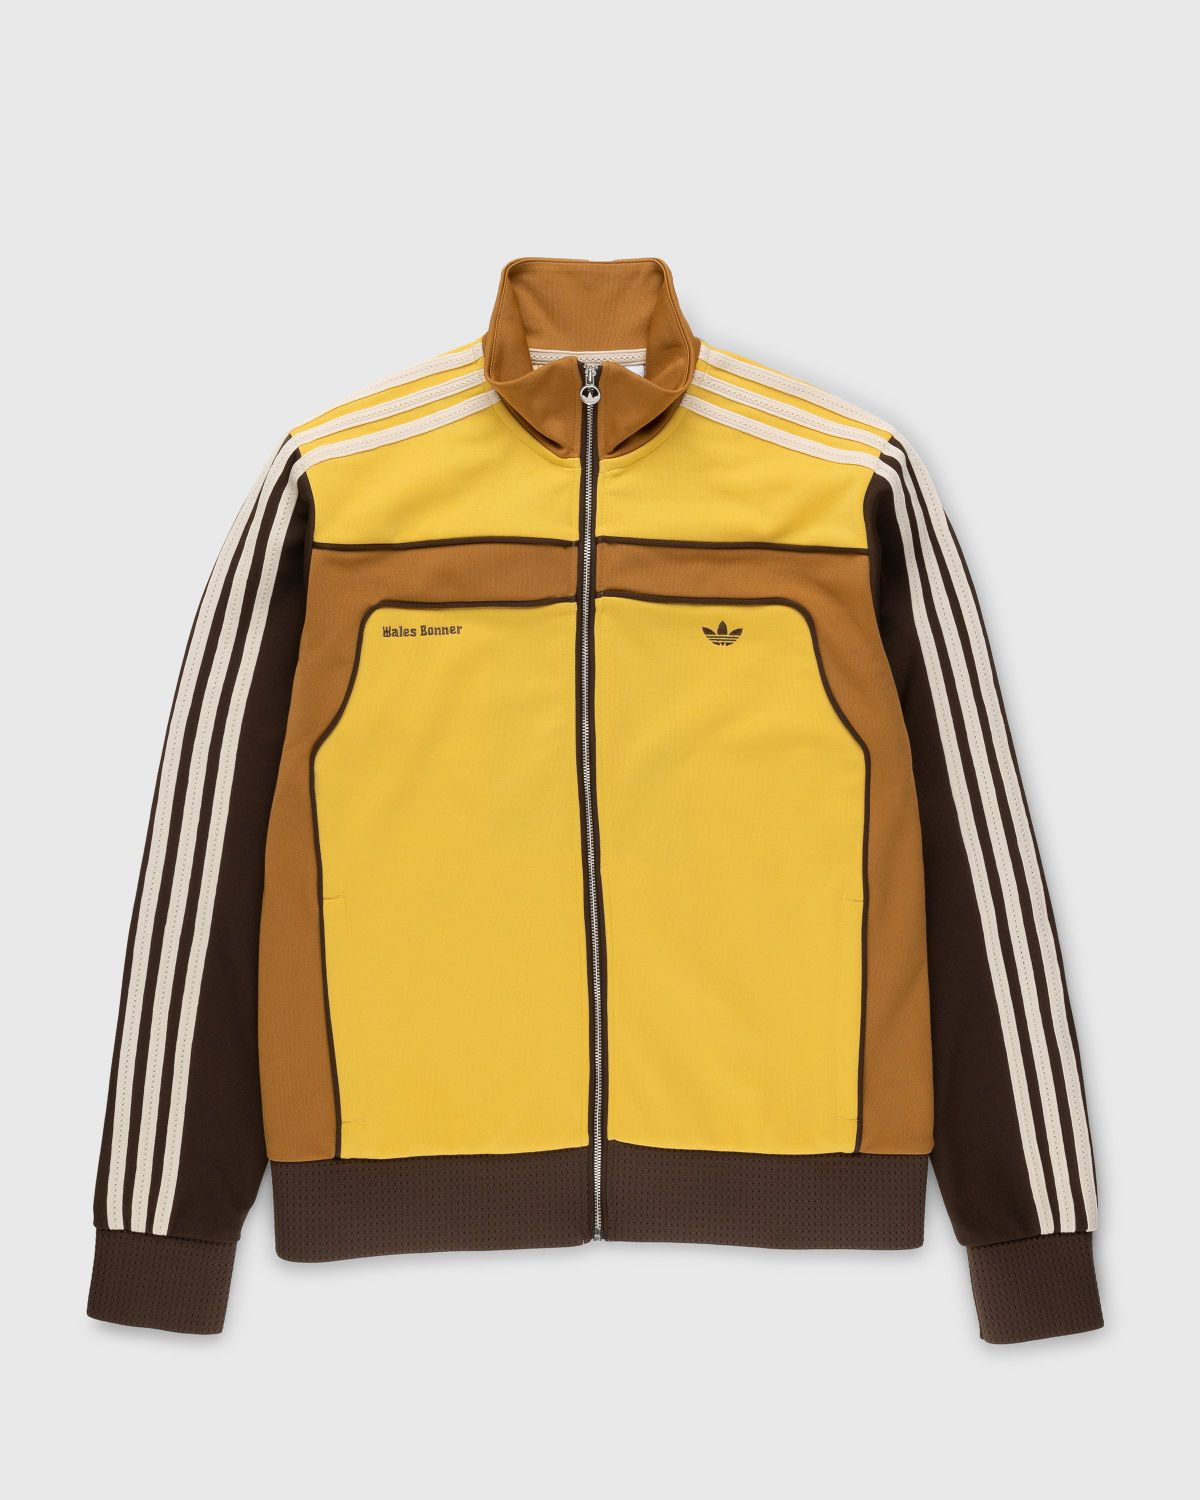 Adidas x Wales Bonner – WB Track Top St Fade Gold | Highsnobiety Shop